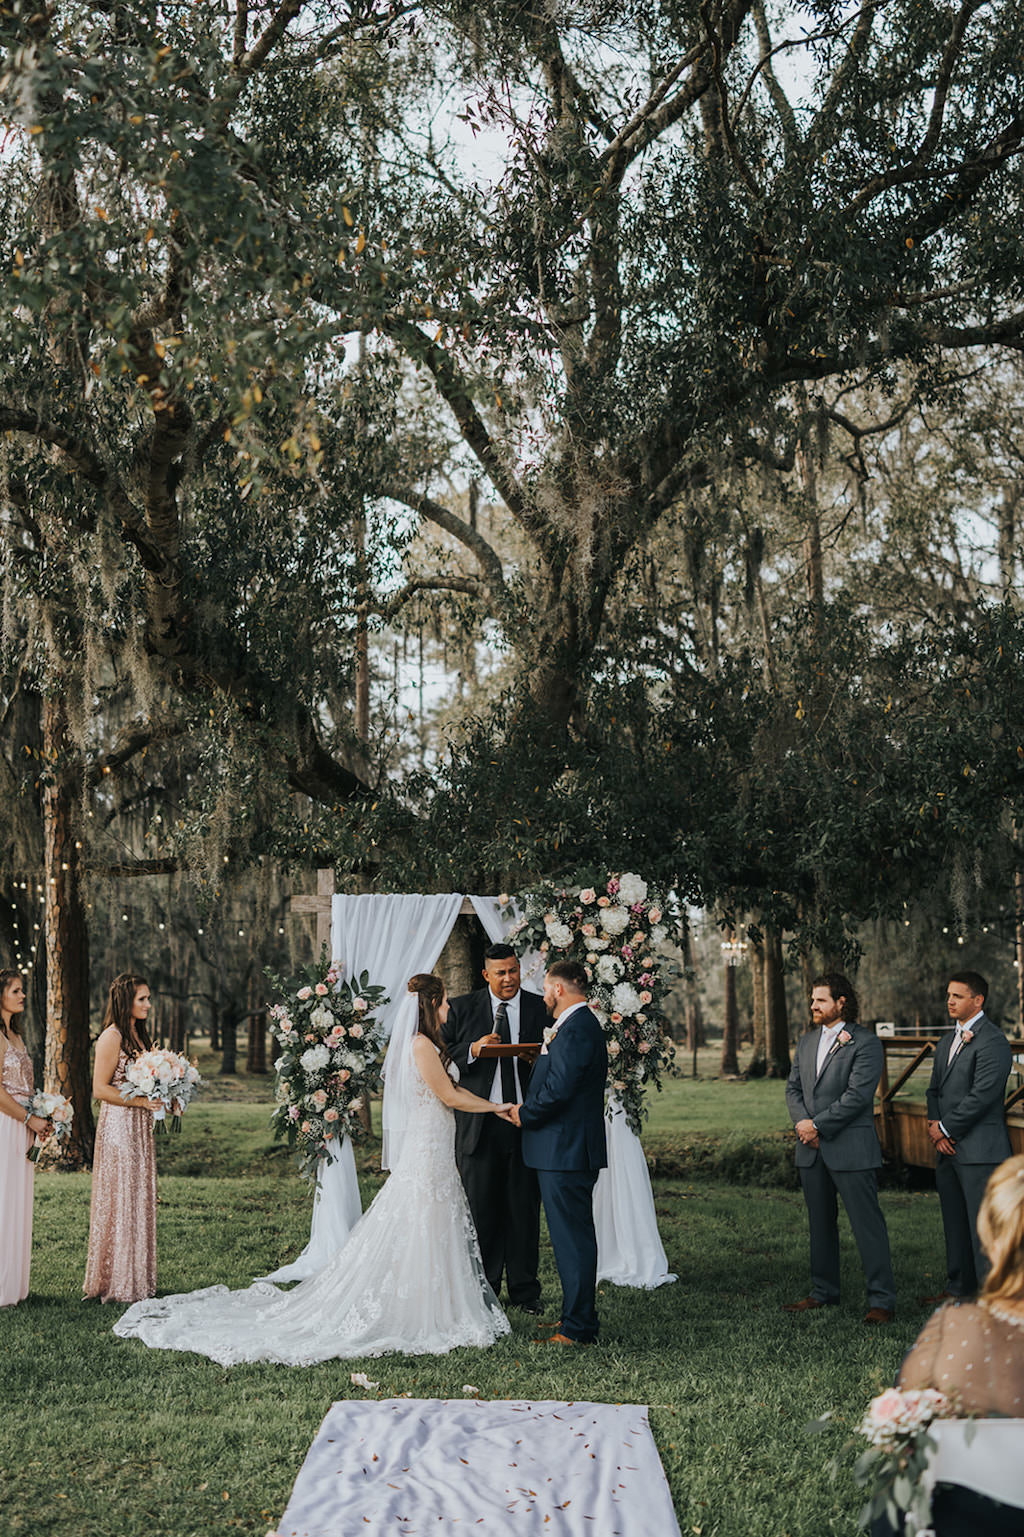 Rustic Chic Bride and Groom Exchanging Vows Under Trees Wedding Ceremony Portrait | Tampa Wedding Venue Rafter J Ranch | Wedding Planner Kelly Kennedy Weddings and Events